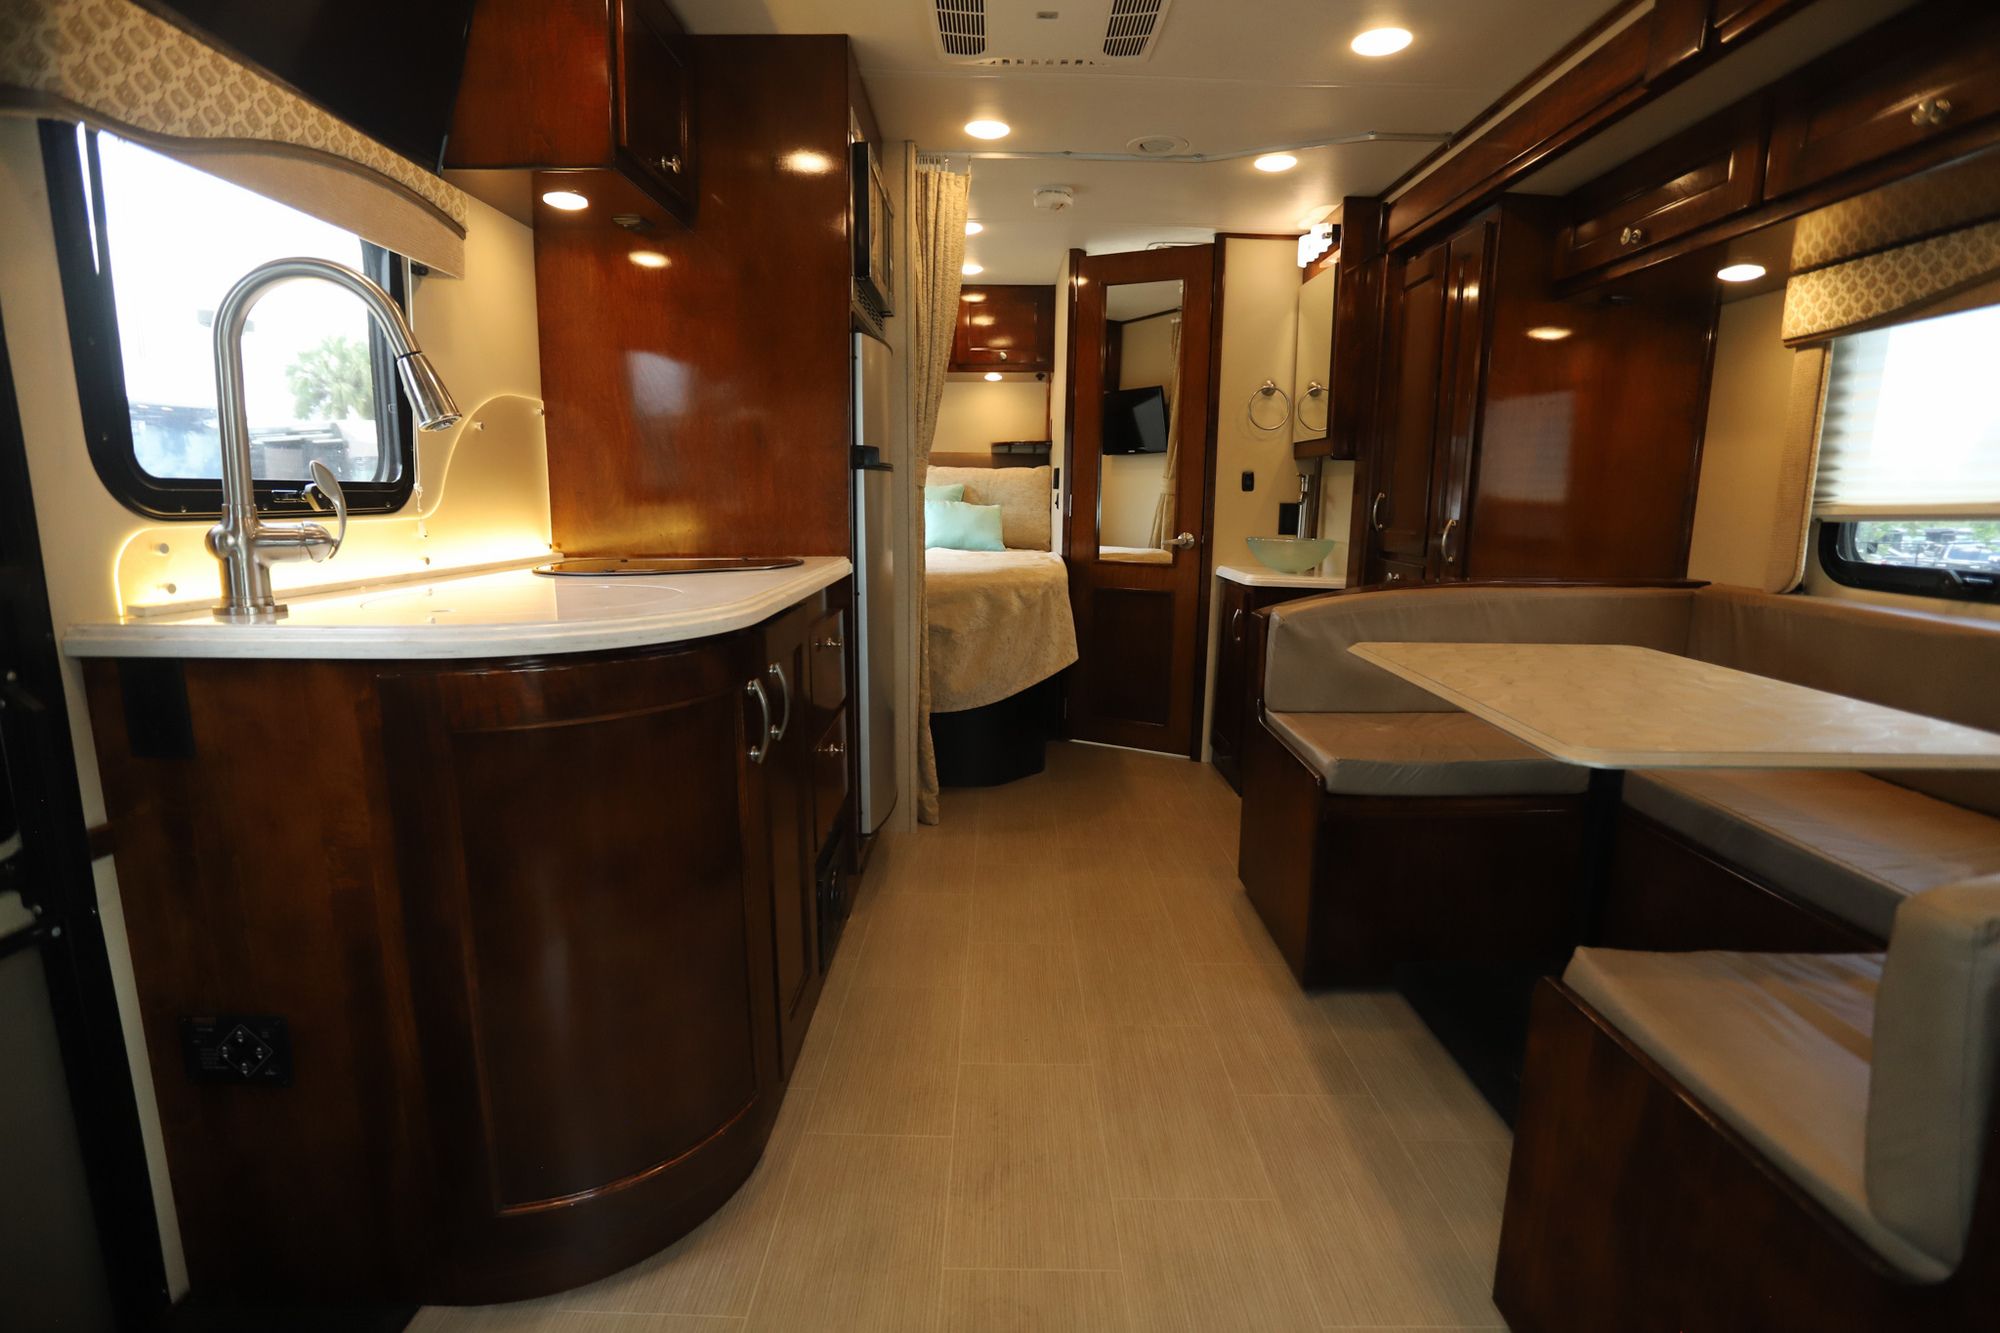 Used 2017 Renegade Rv Vienna 25VUCB Class C  For Sale